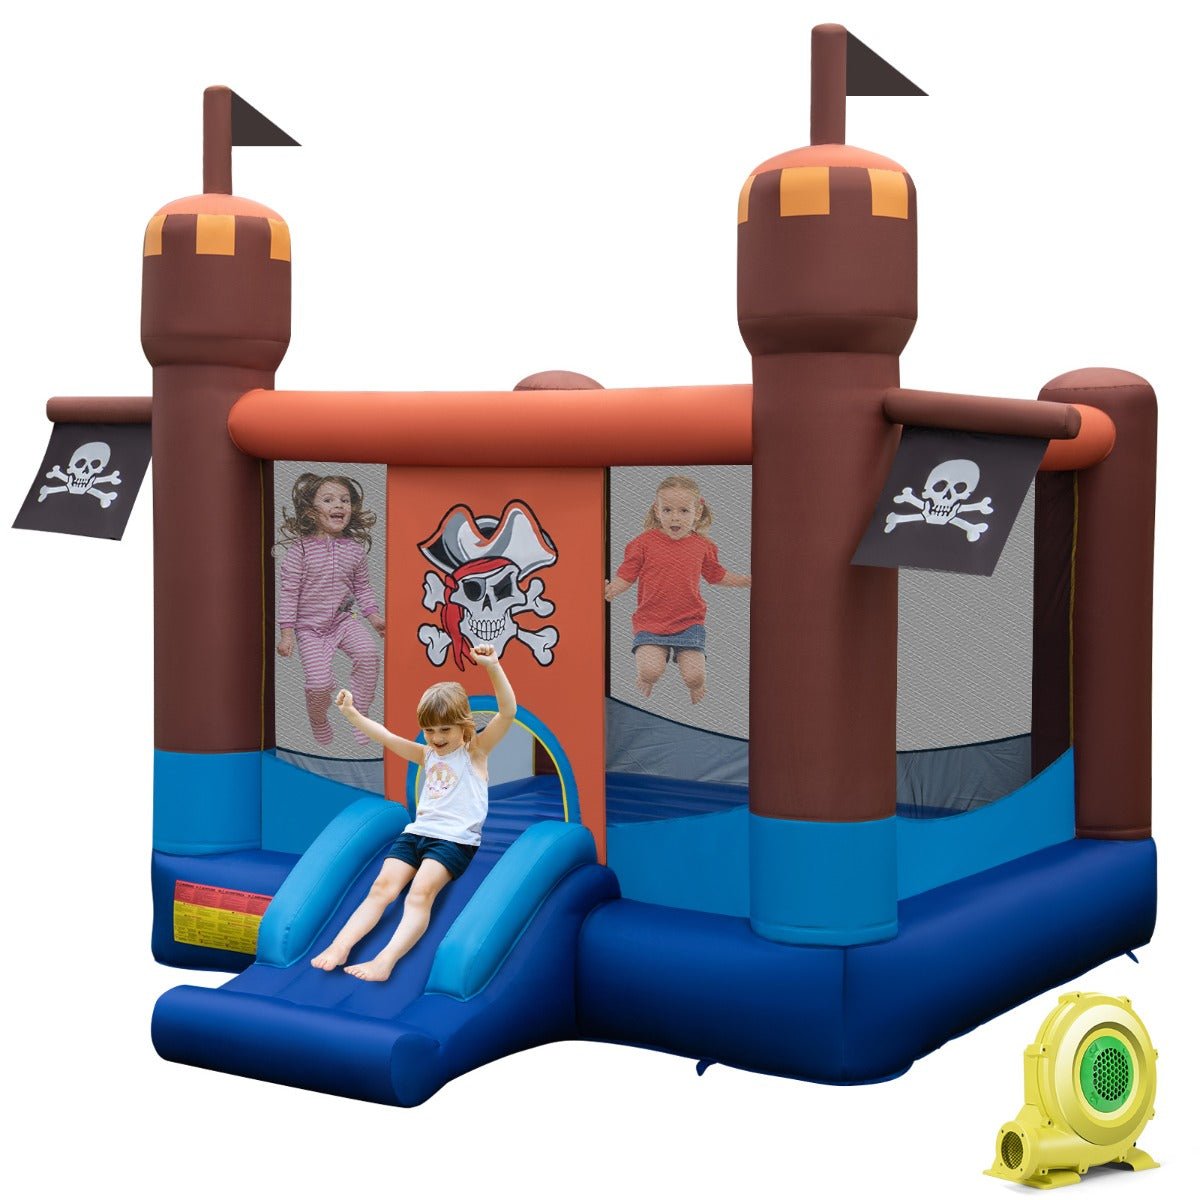 Inflatable Bounce Castle - Outdoor Fun with Large Bounce Area and Hoop